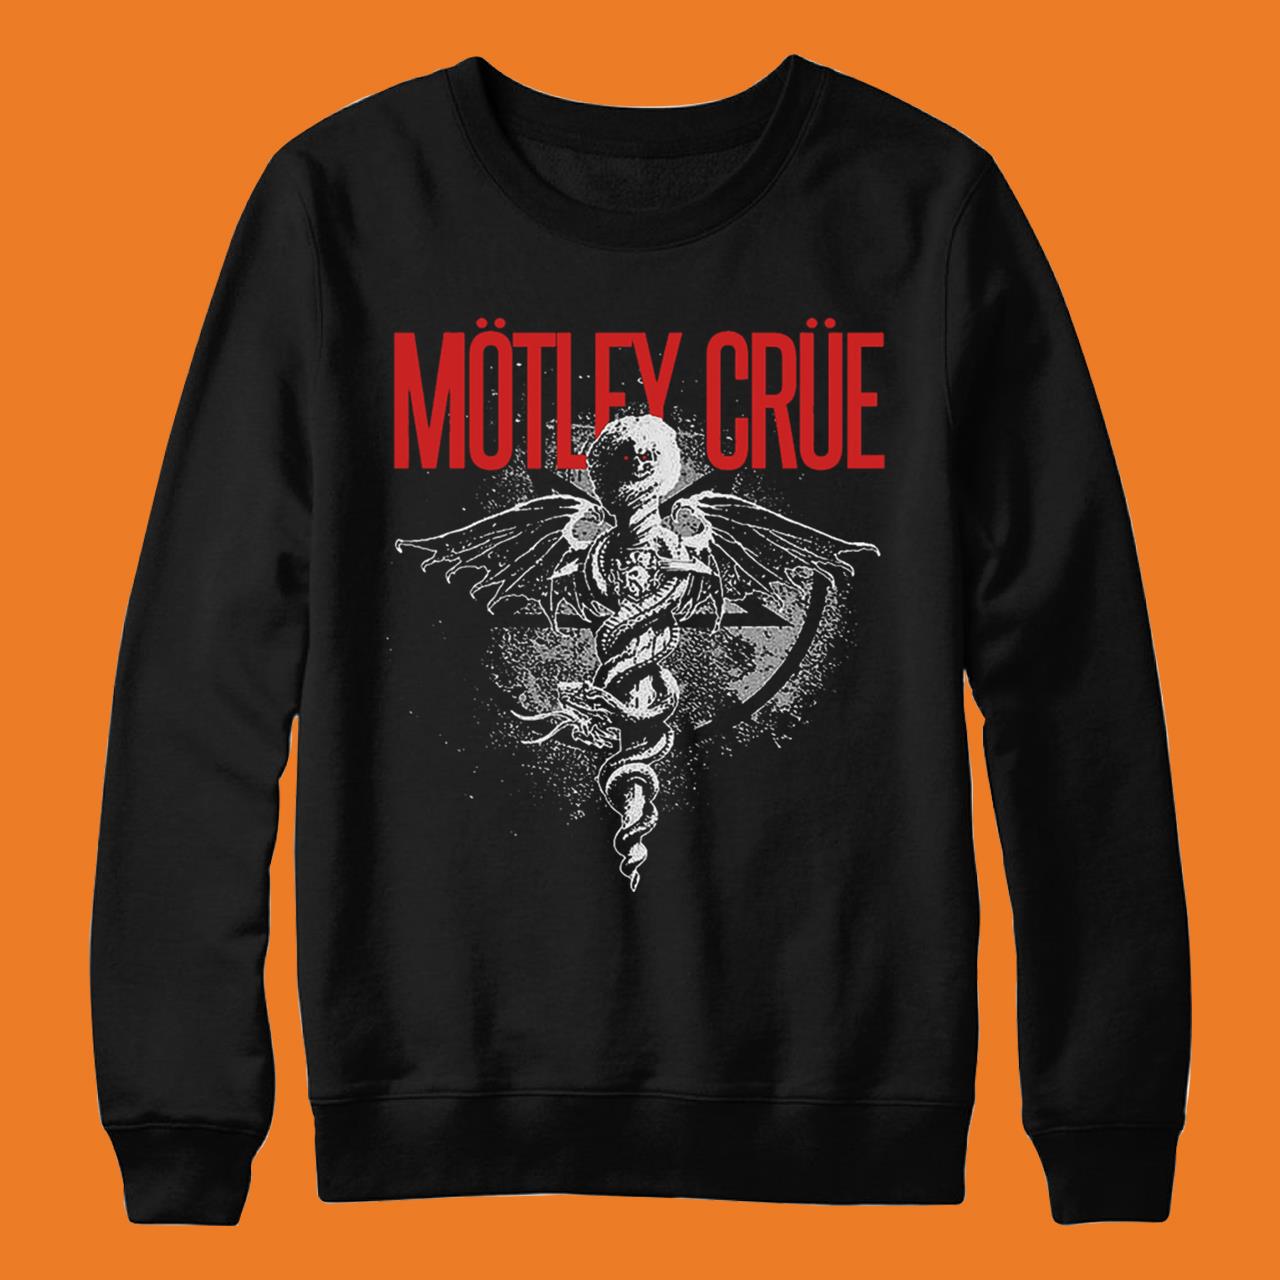 Motley Crue The Brave Will Get It T-Shirt